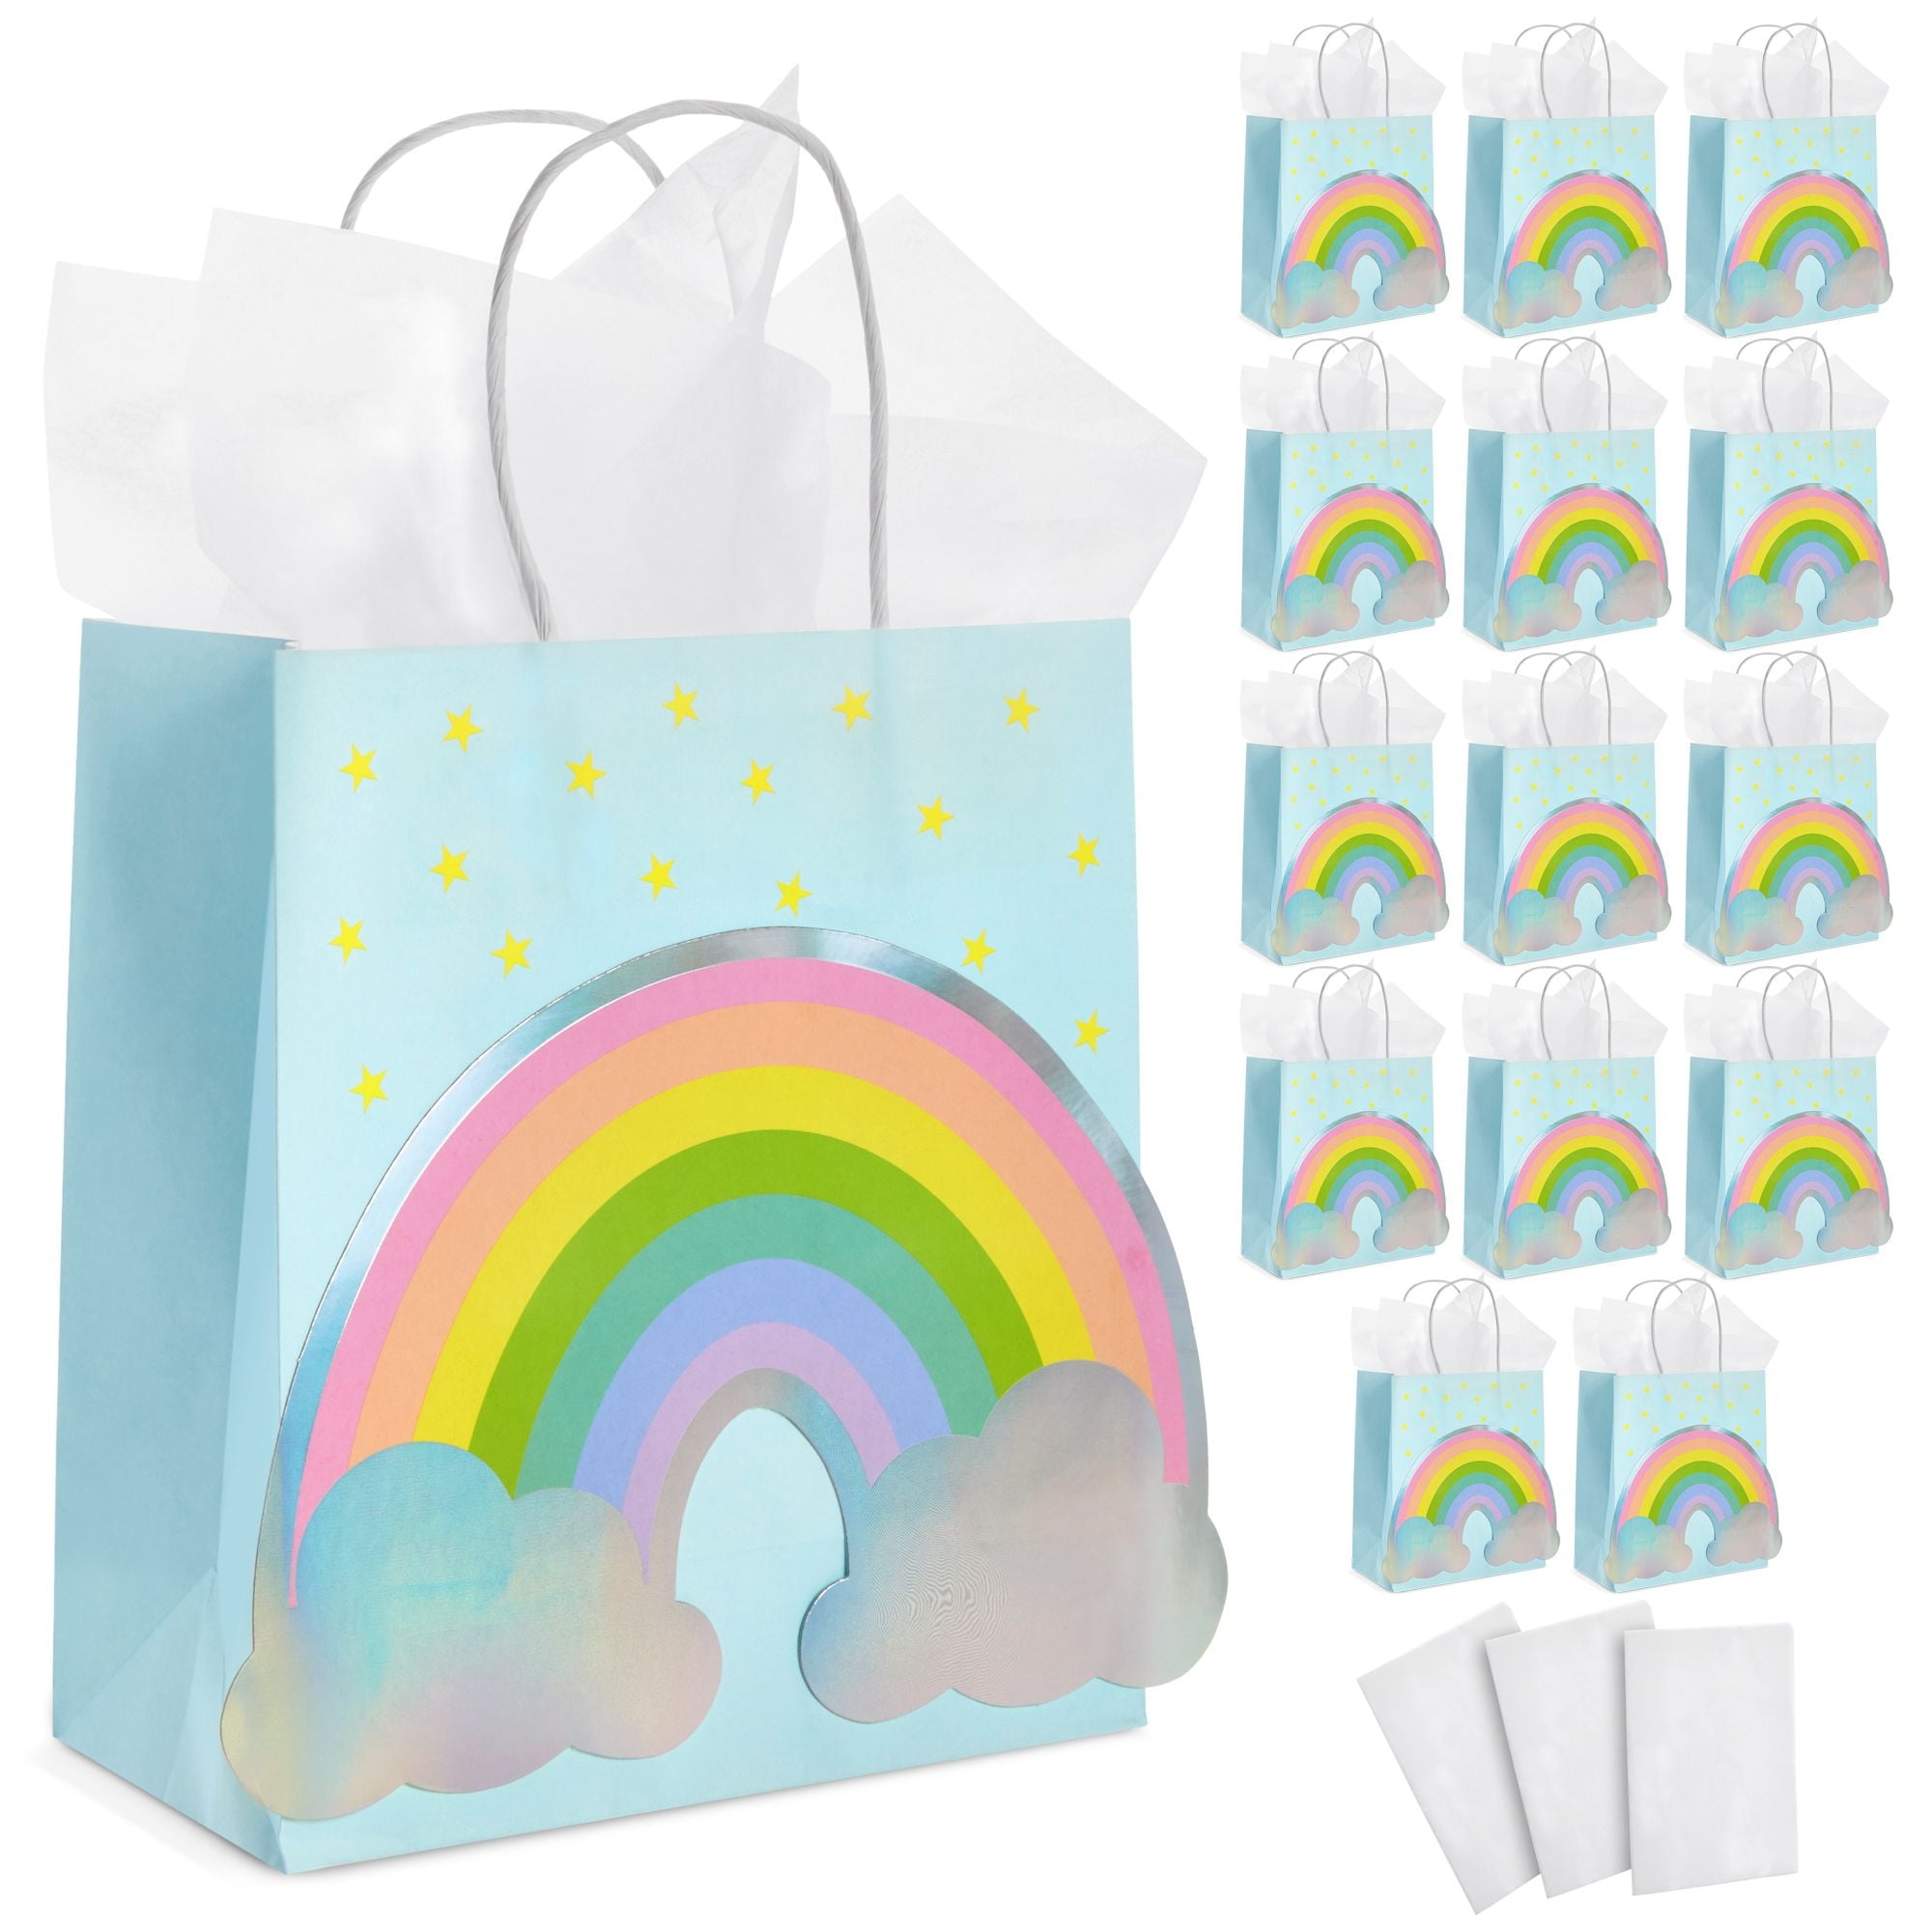 What to Put in Goodie Bags: 20 Birthday Party Favors for Adults